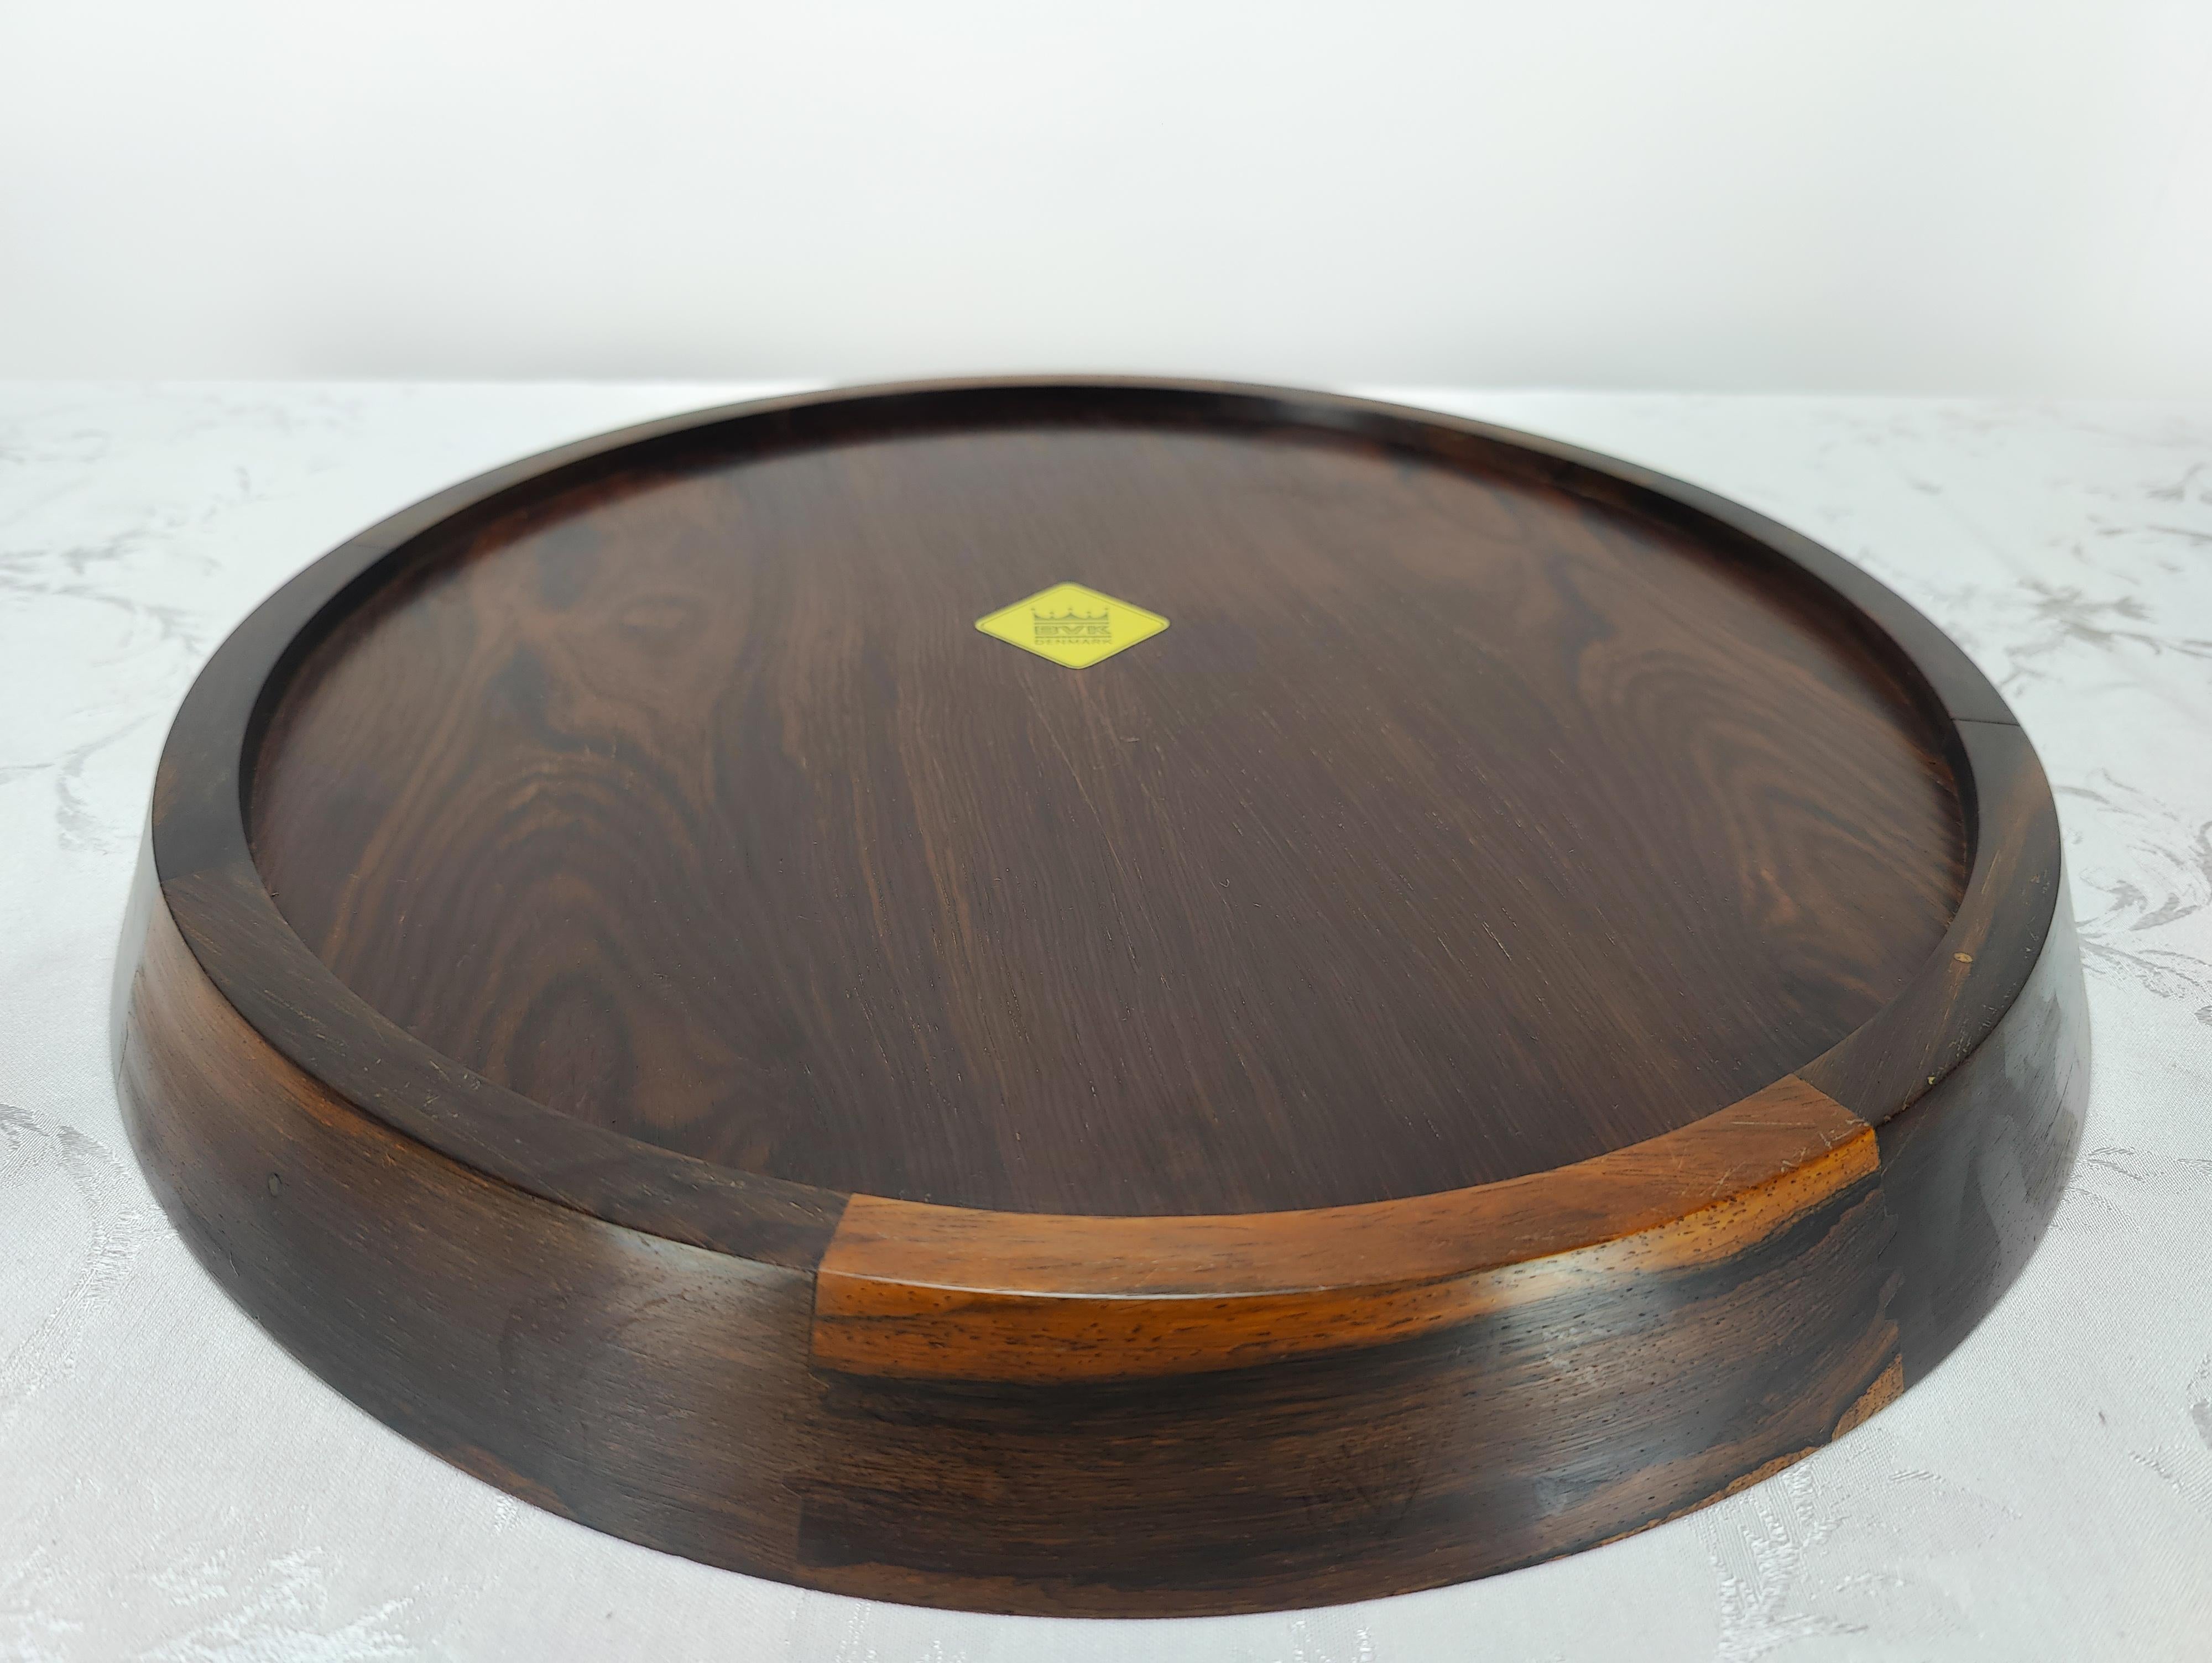 Rosewood serving tray, designed and made in Denmark by BVK (labeled)

Condition: Overall very good original condition with minor surface level scratches. Would fit right in & be lovely in any midcentury styled home. Would give any room with light